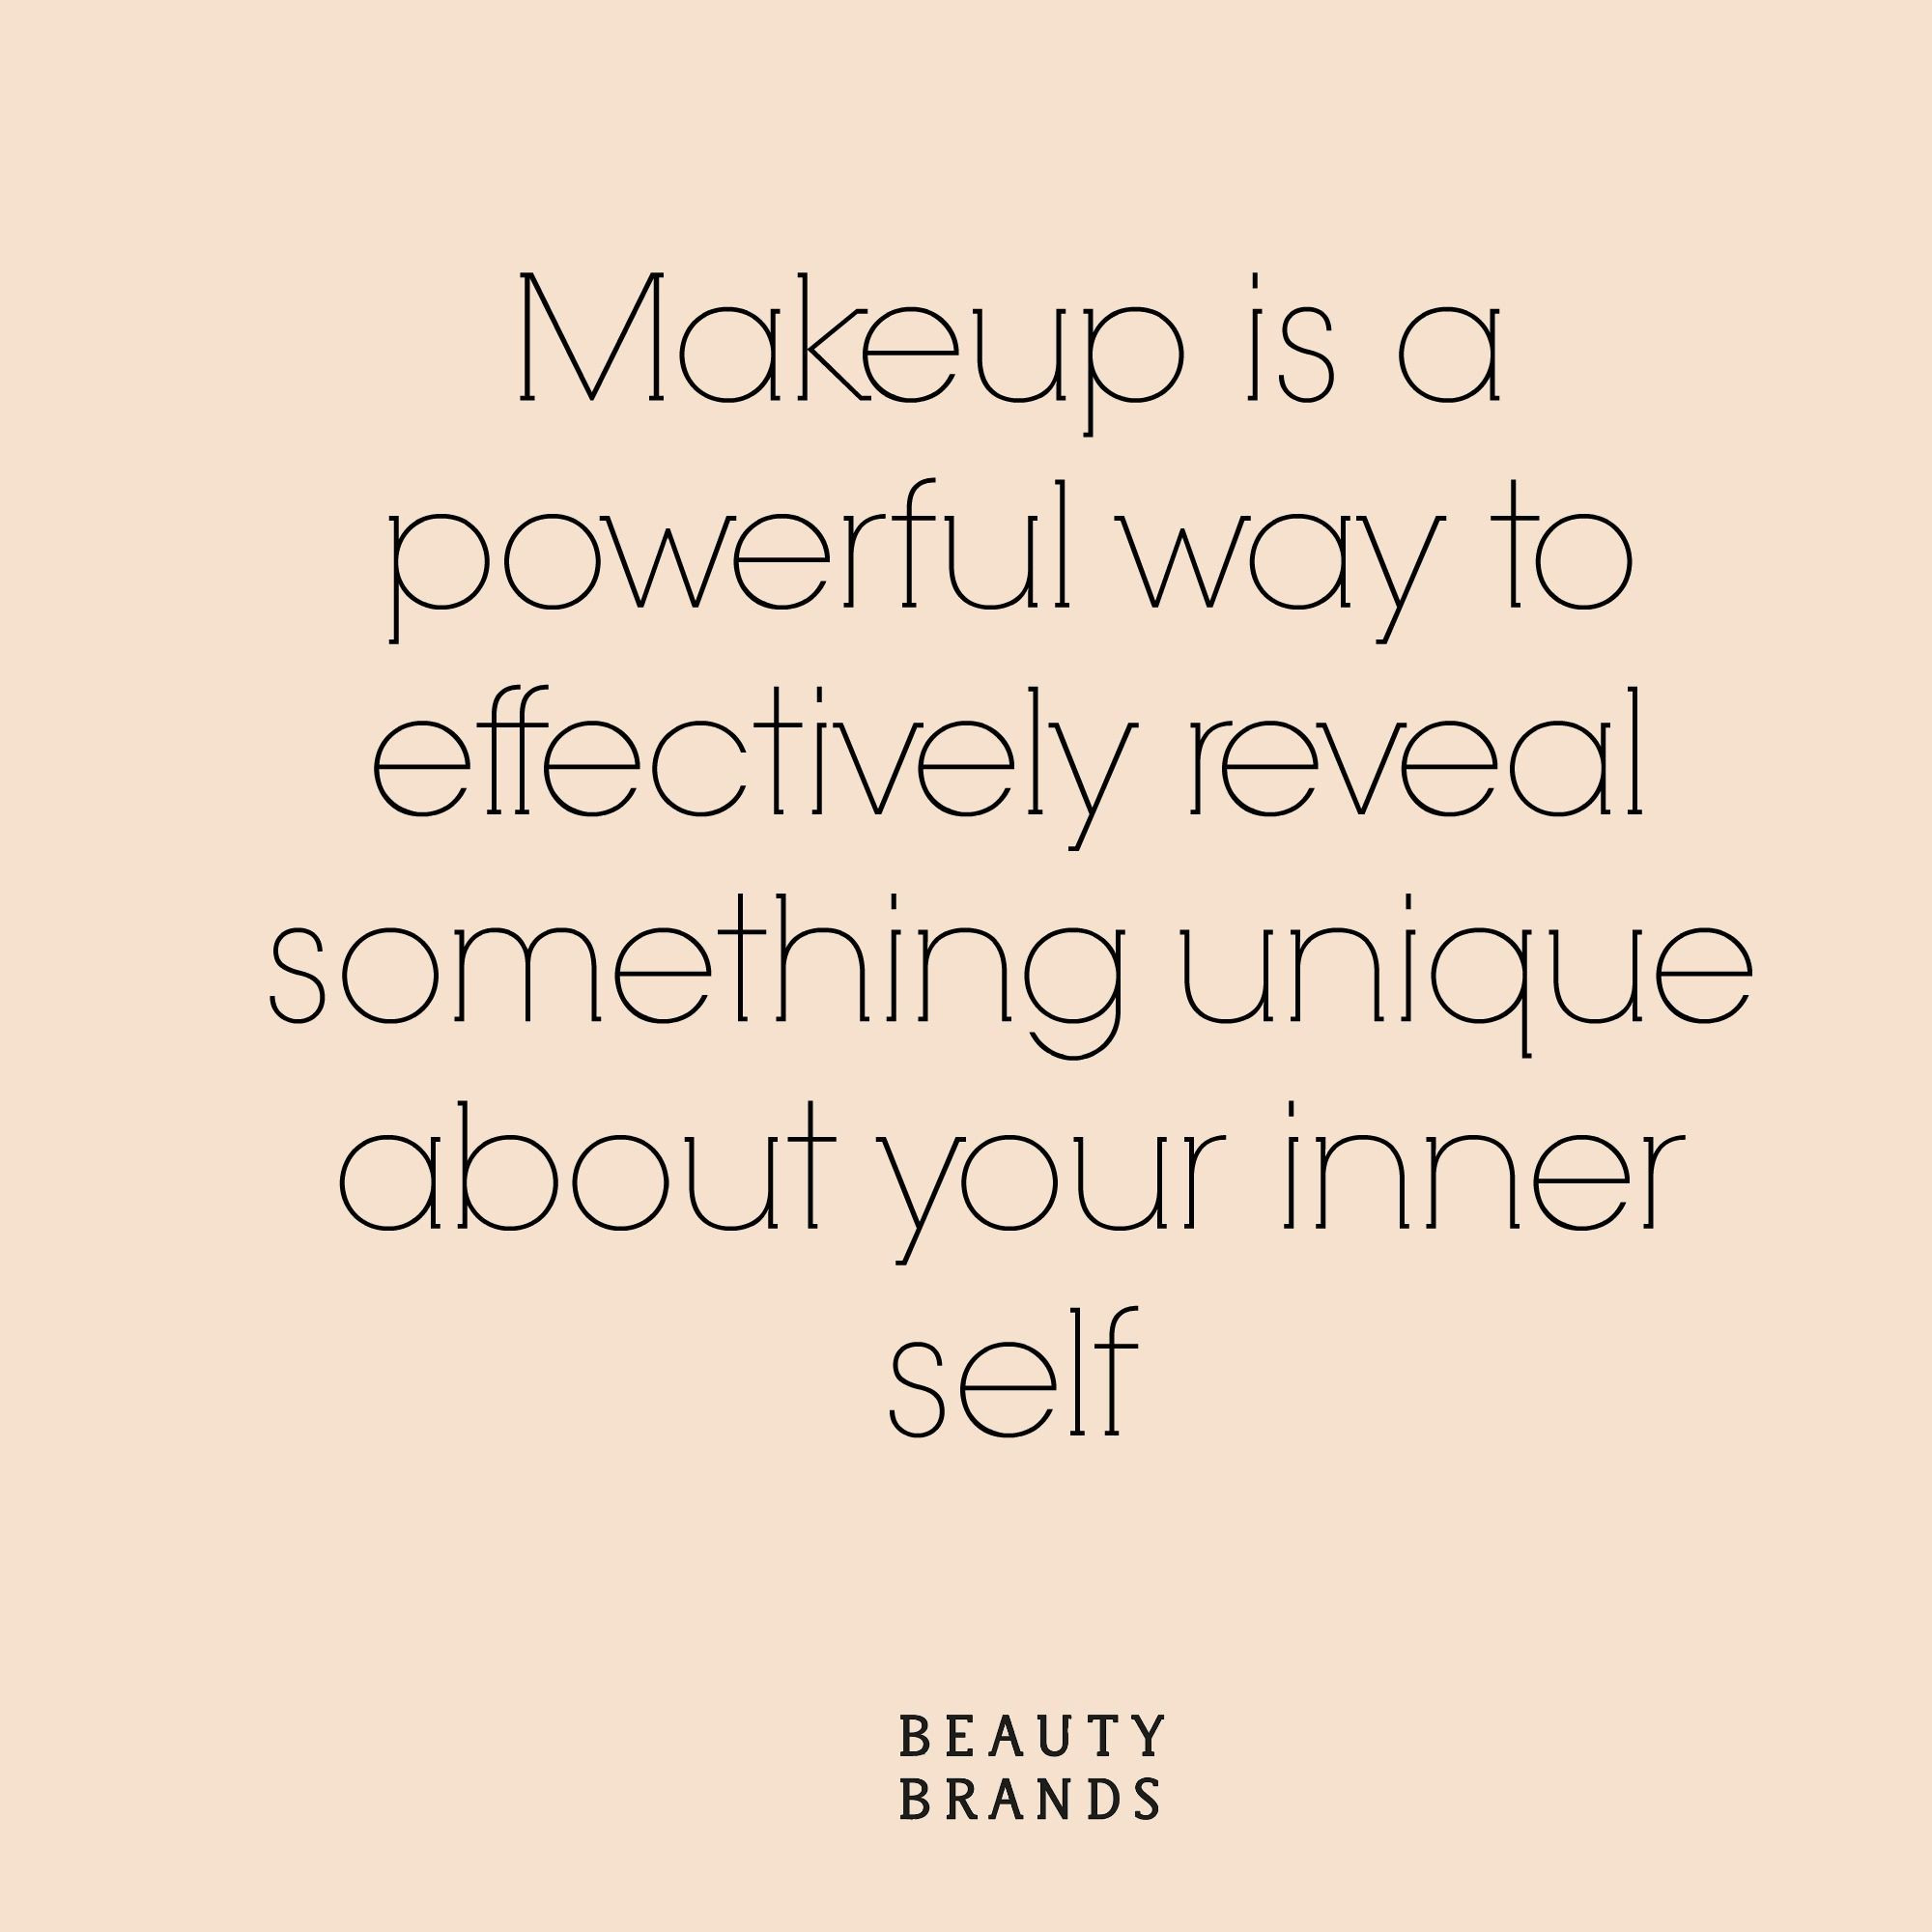 Relationship Makeup Quotes
 Makeup is a powerful way to effectively reveal something